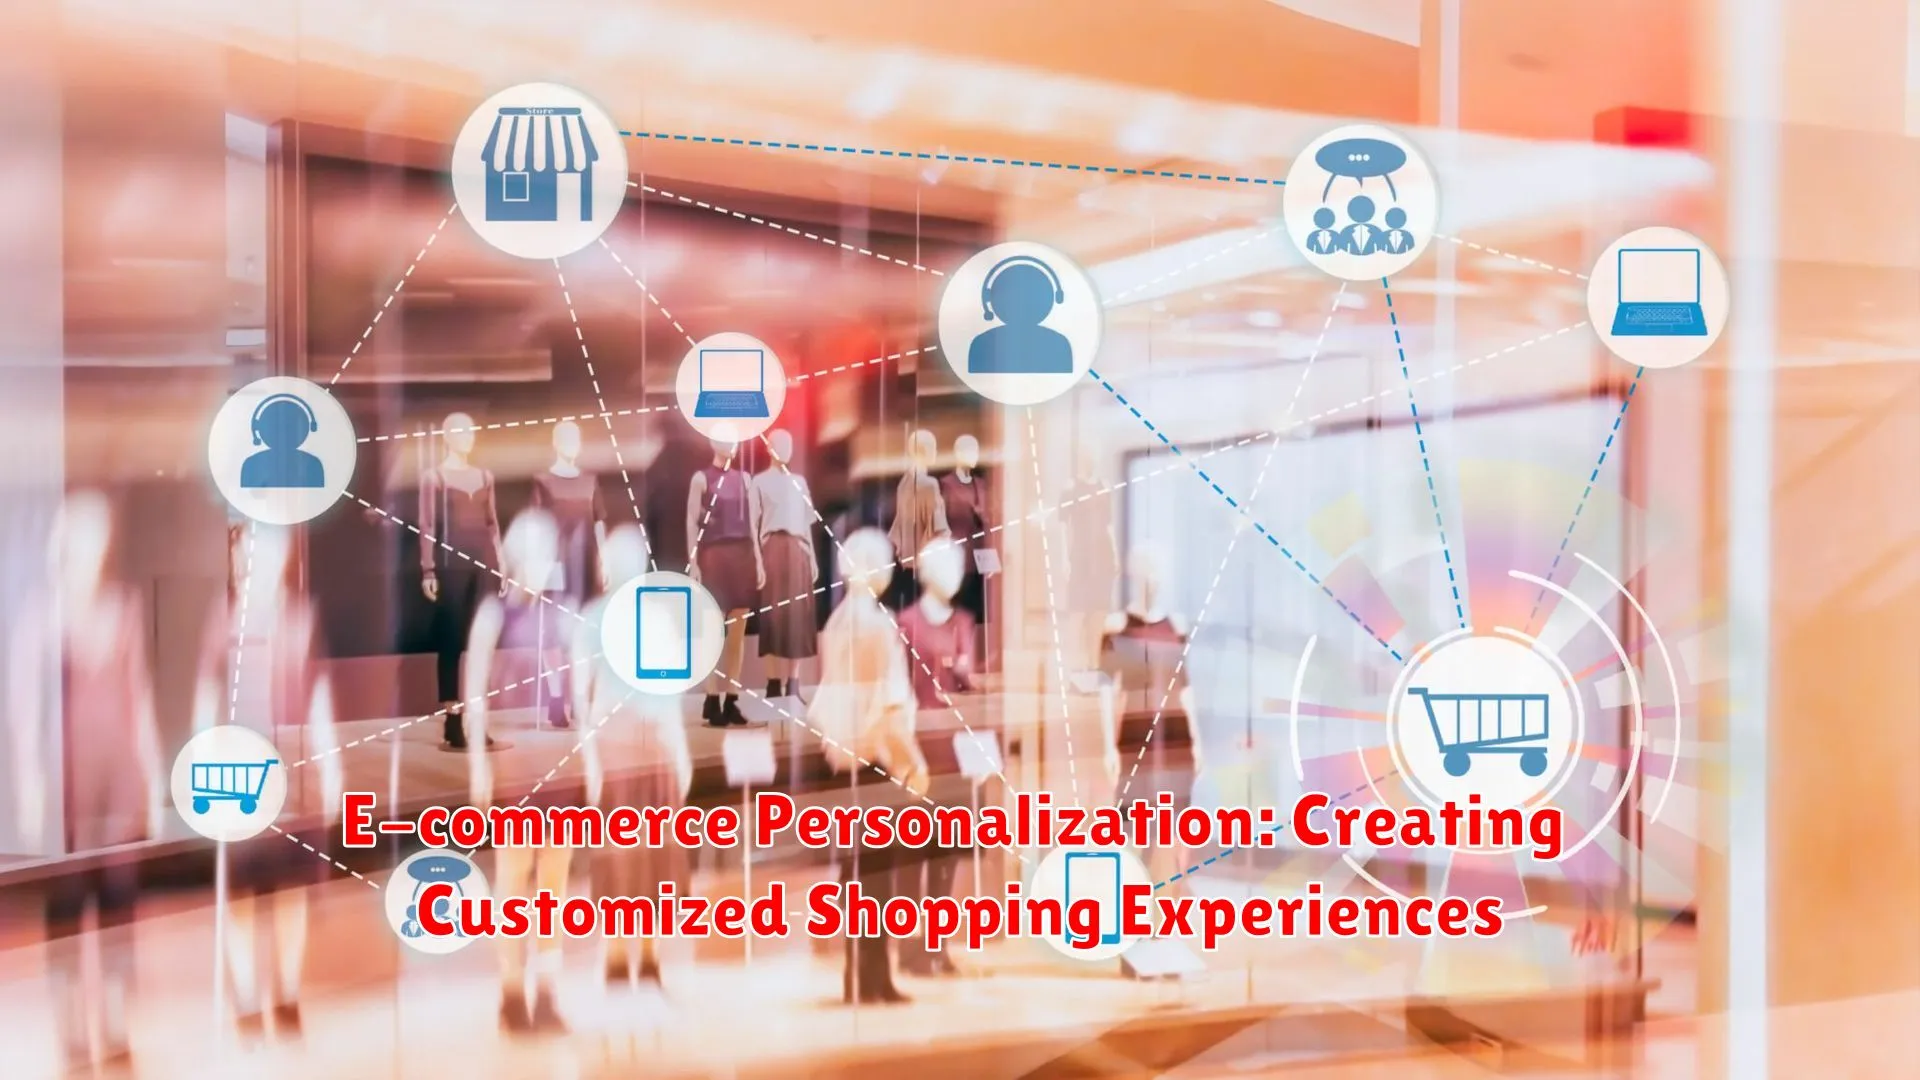 E-commerce Personalization: Creating Customized Shopping Experiences